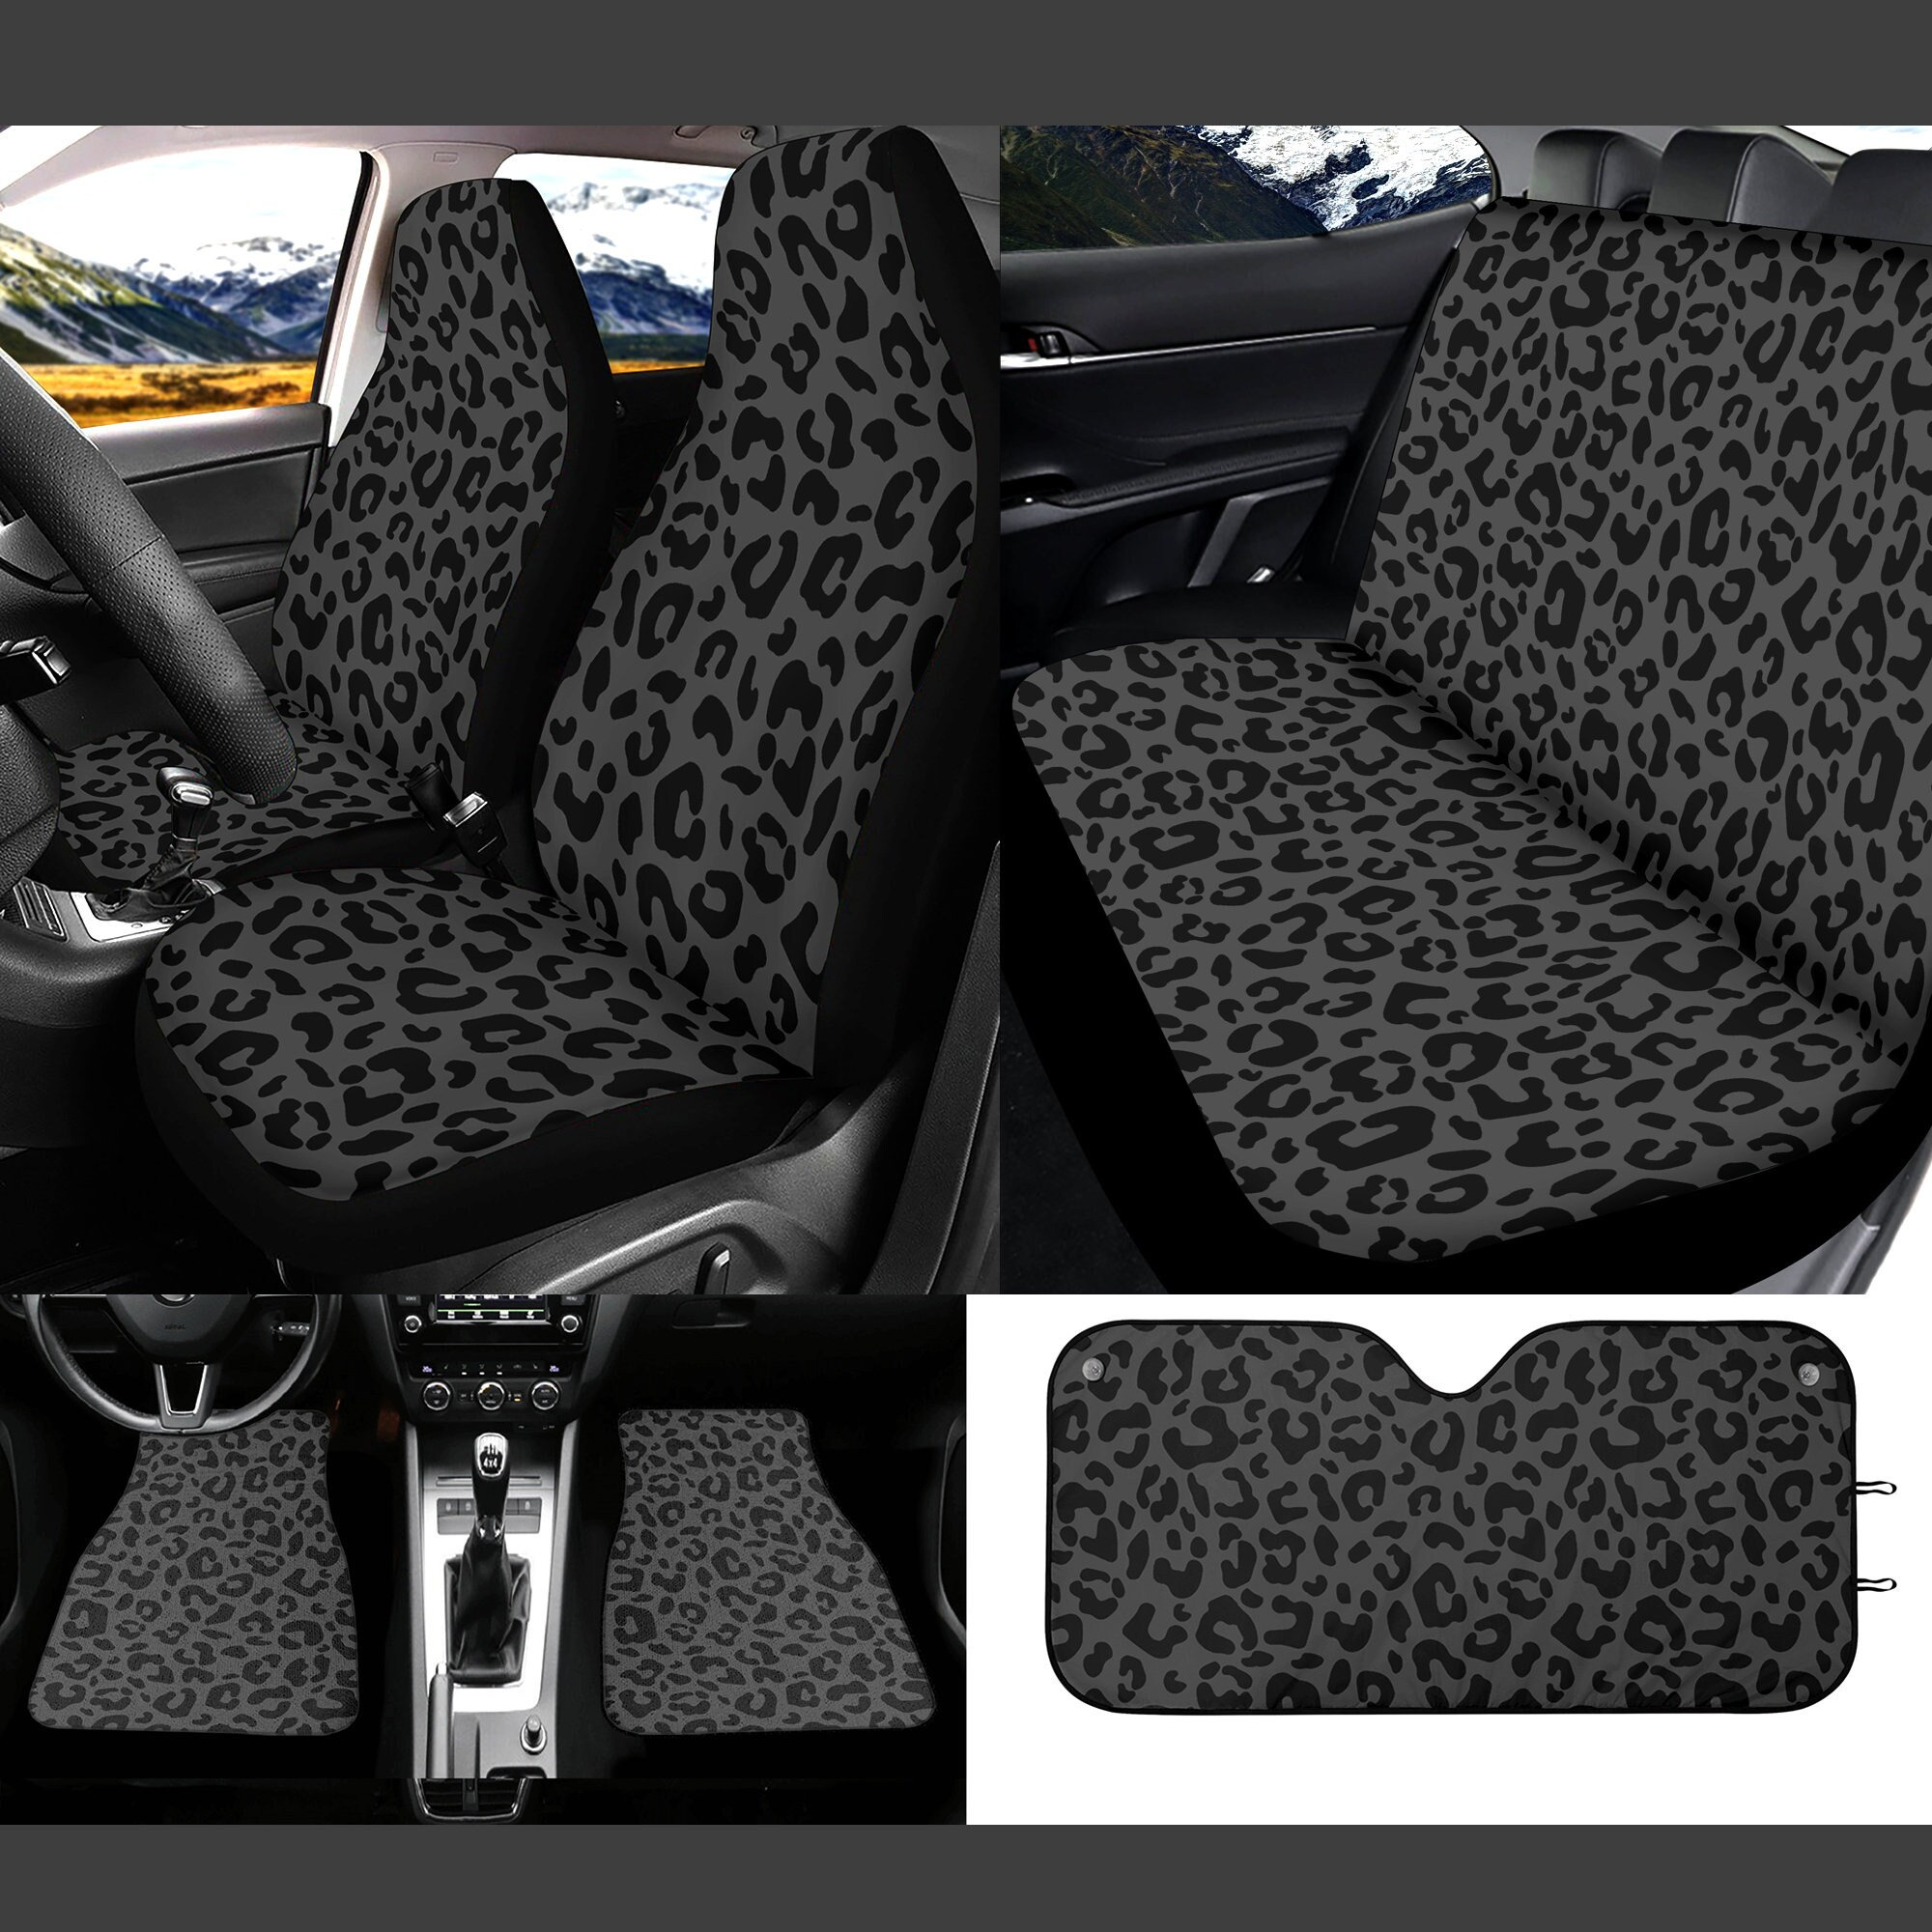 Shop car seat cover for Sale on Shopee Philippines